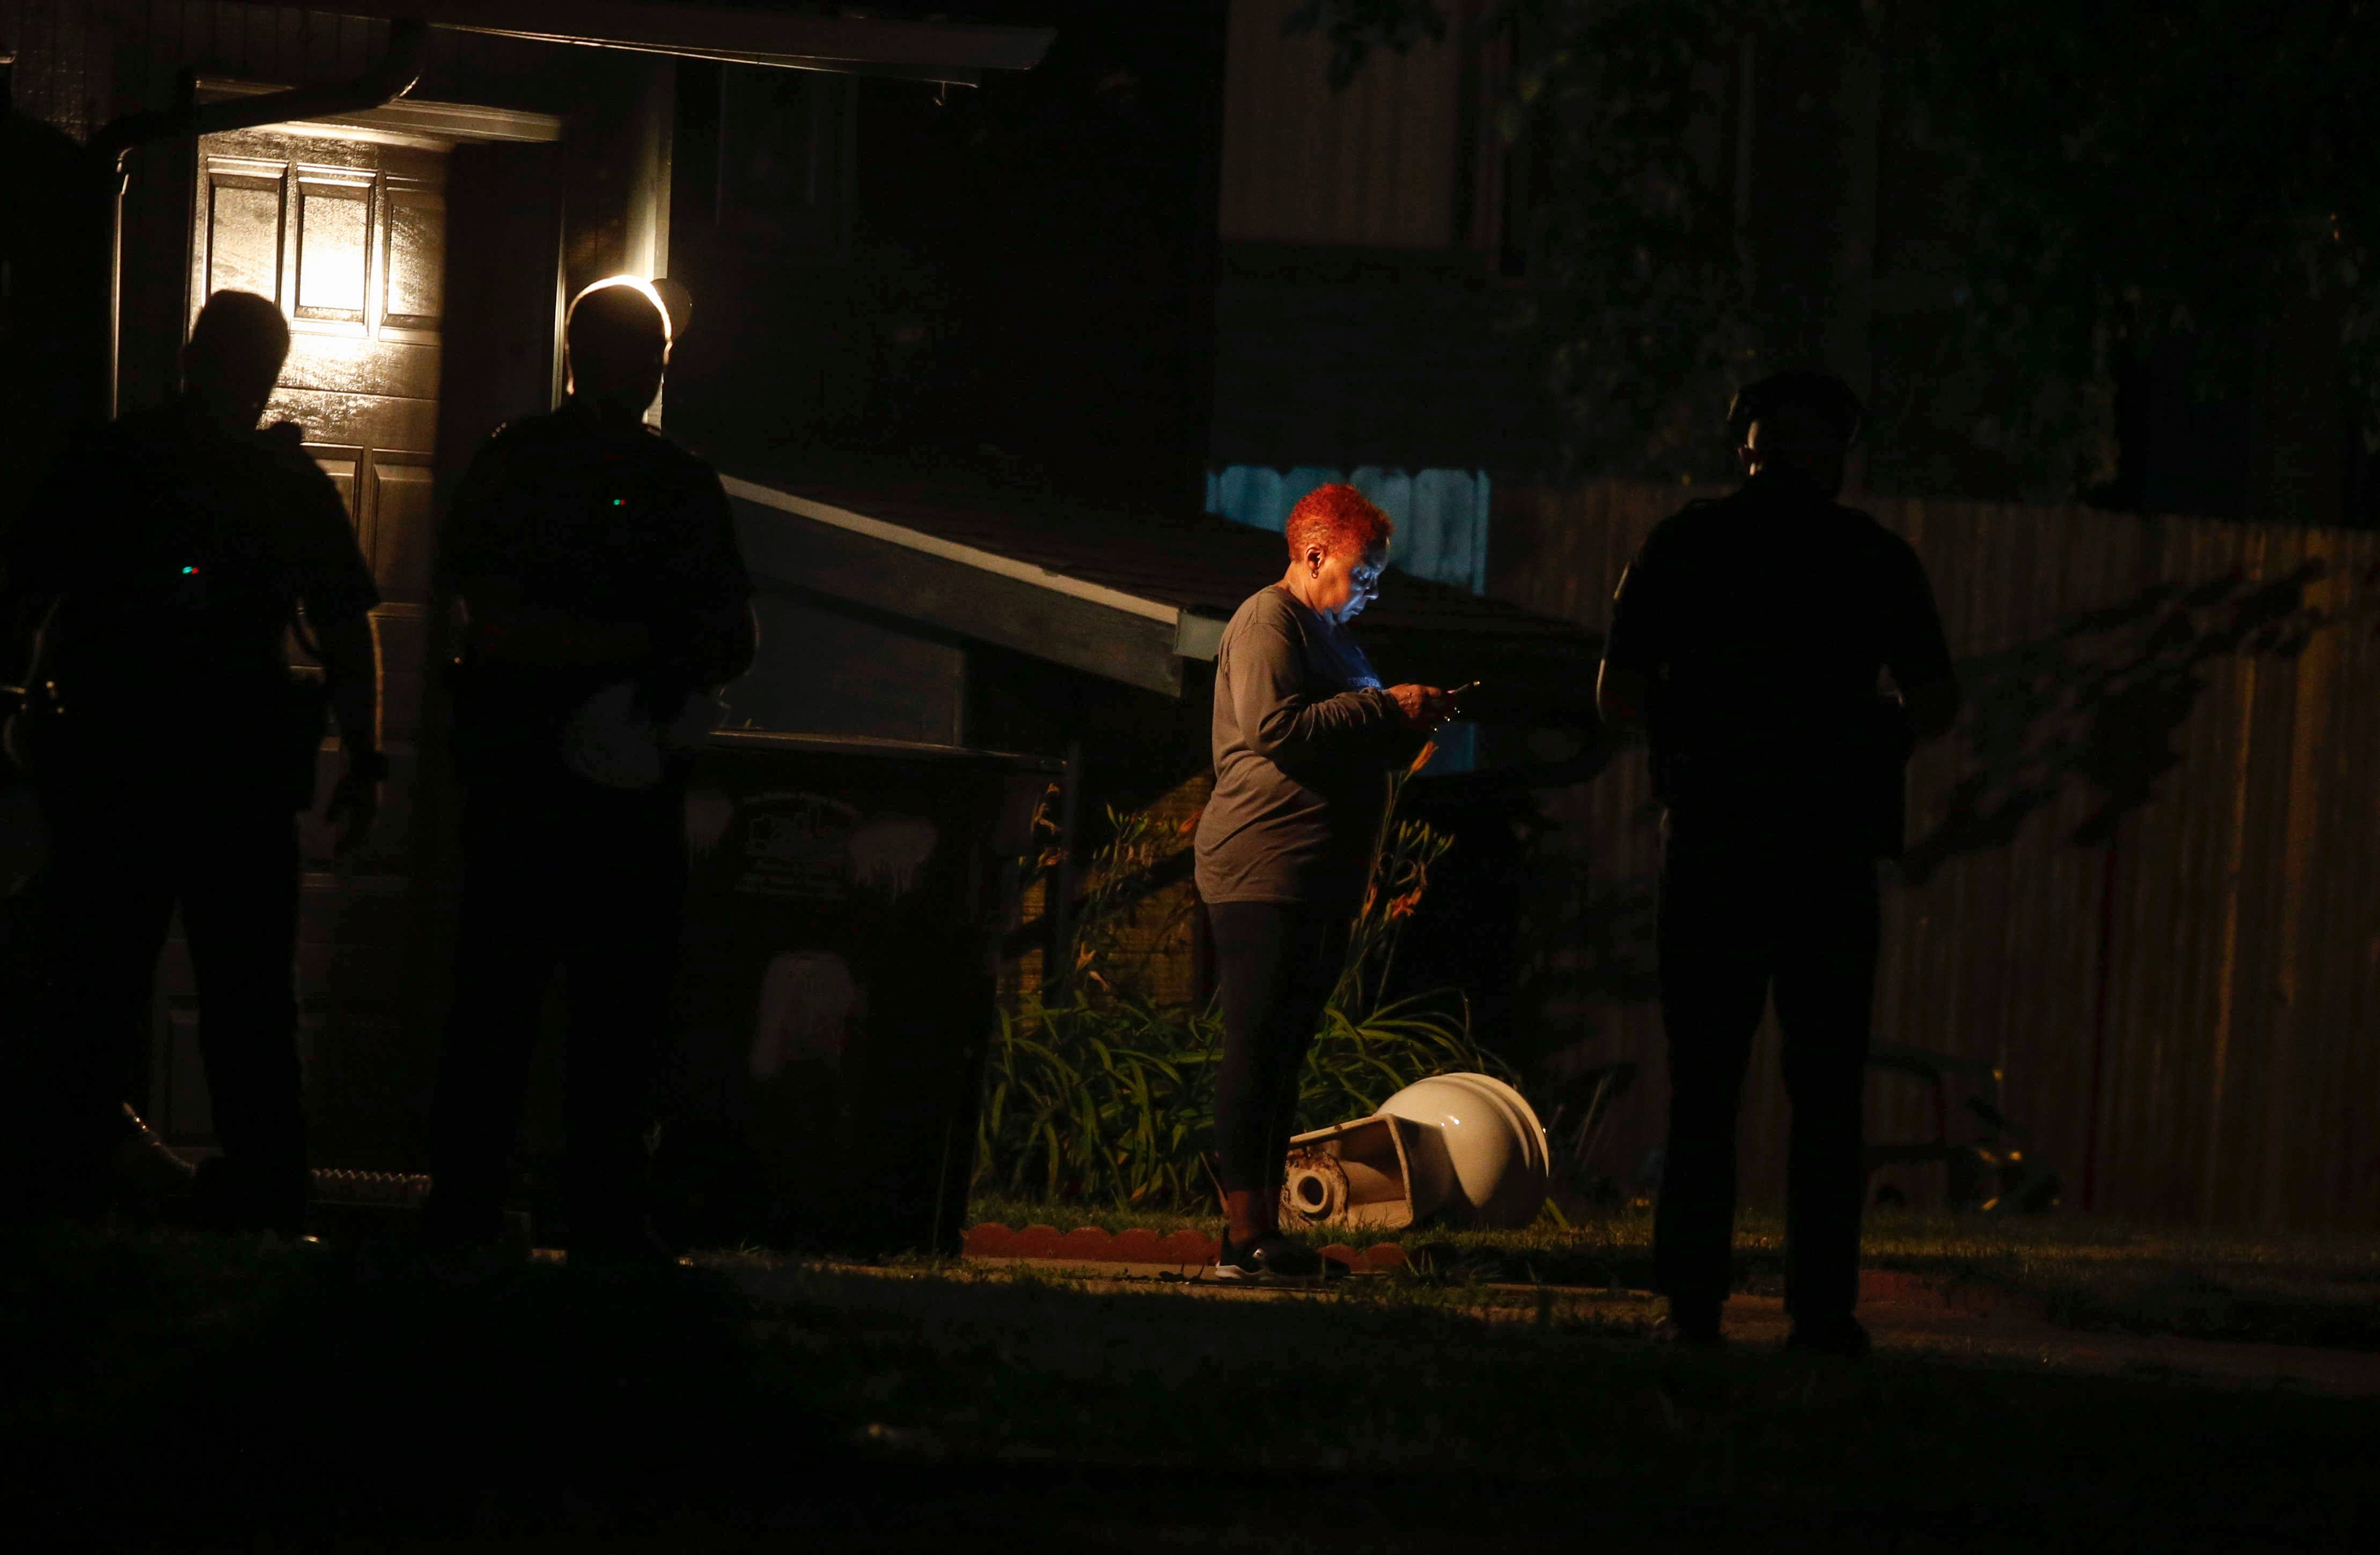 Des Moines police work the scene at a home on Day Street where multiple people were found deceased late on Tuesday, July16, 2019.